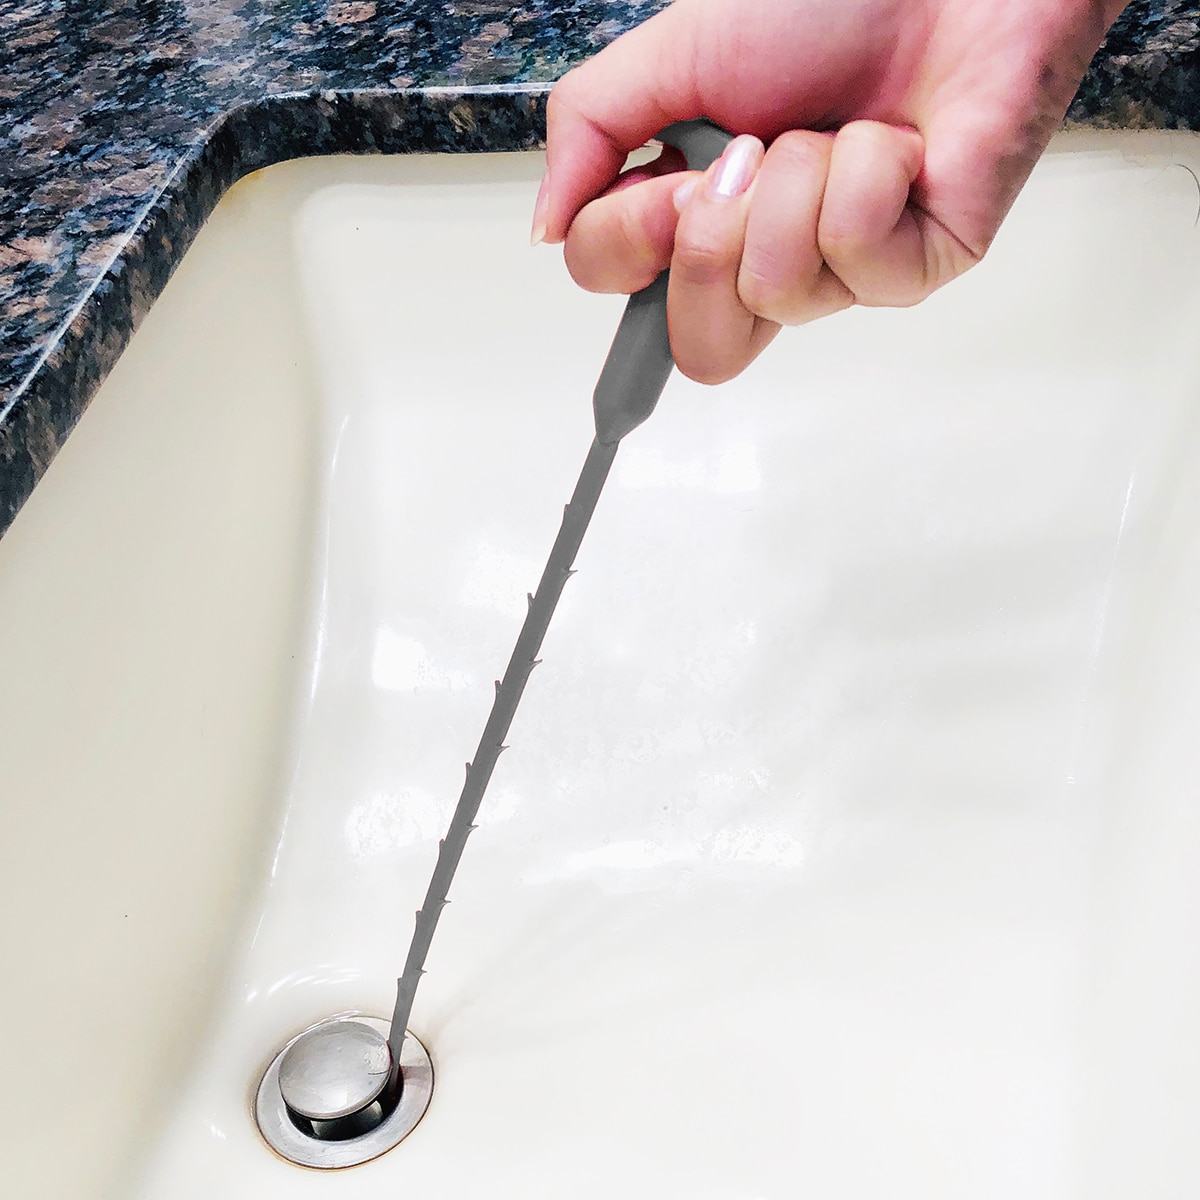 Sink Wizard™ Drain Clog Removal Tool - As Seen On TV Tech